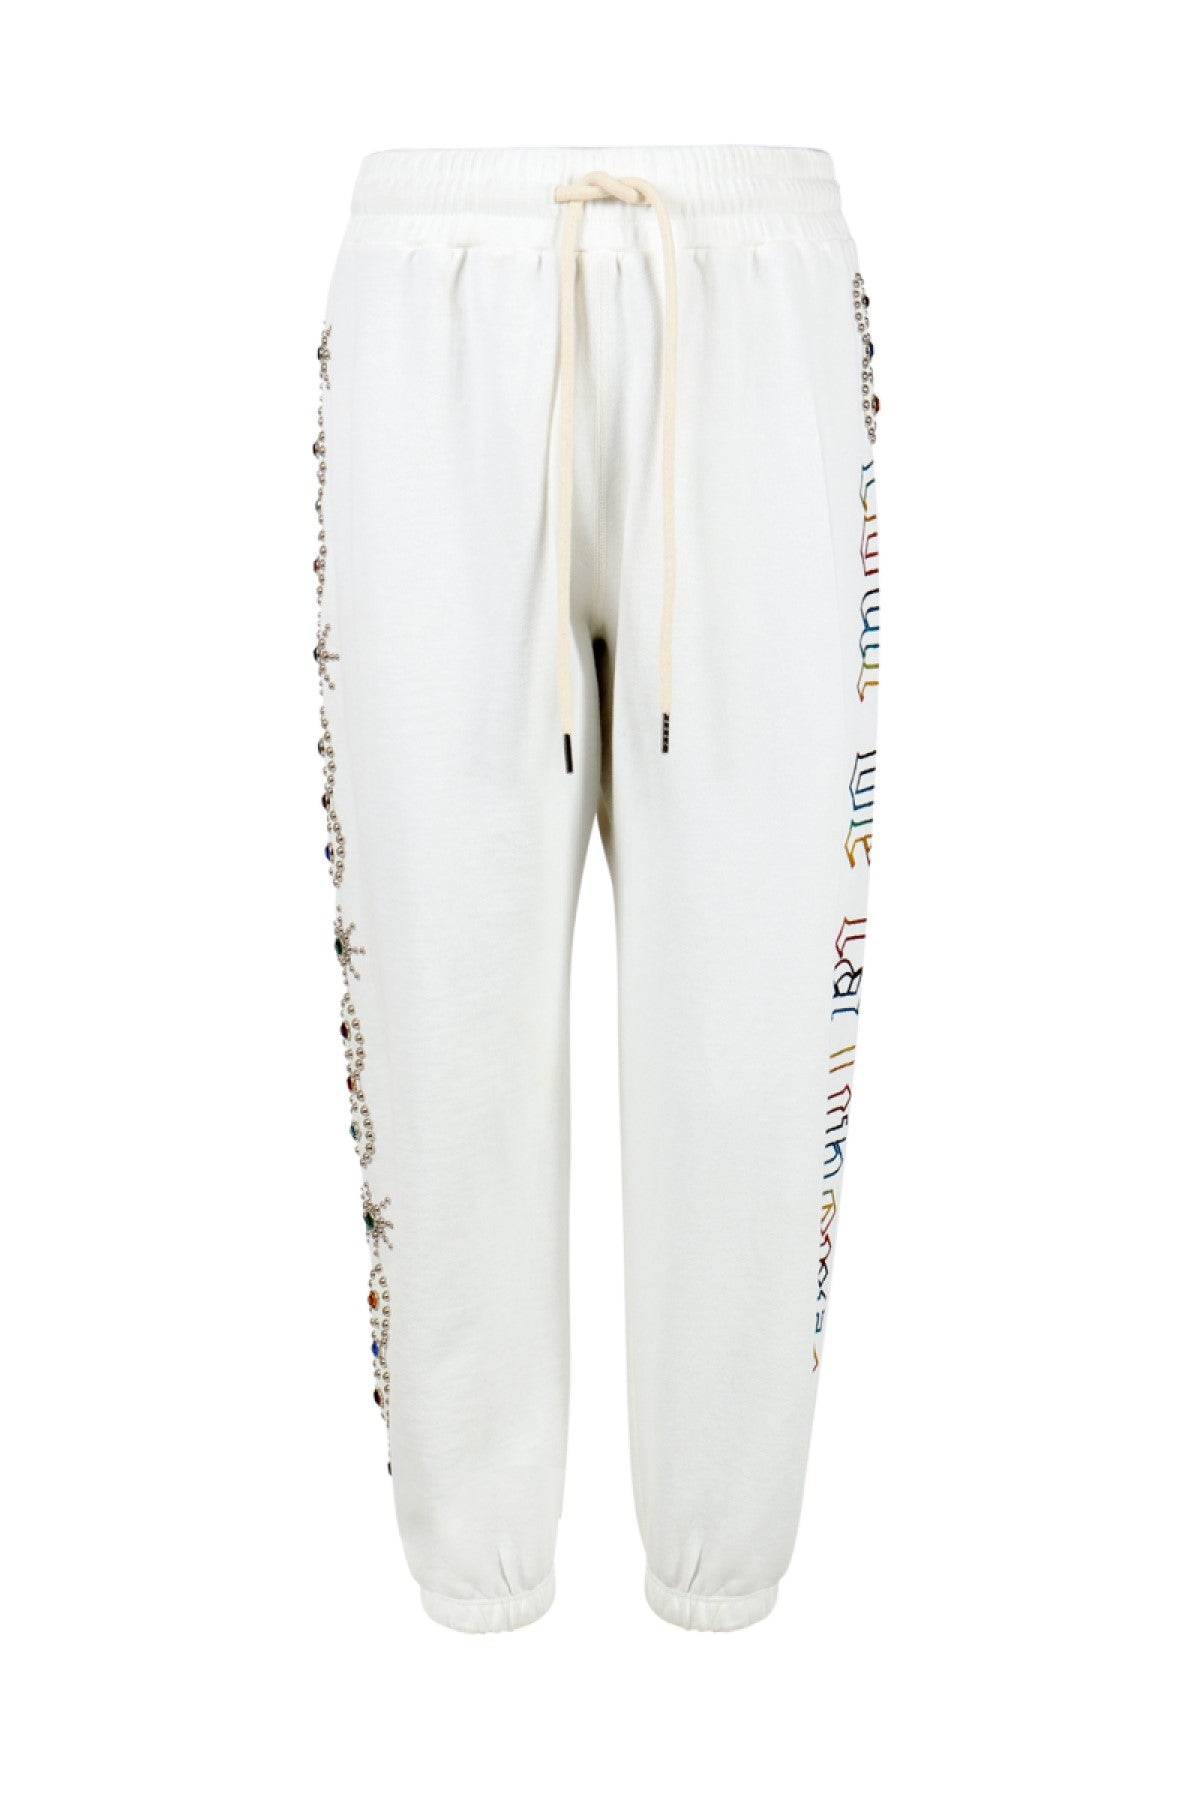 Jean/Embellished French Terry Sweatpants